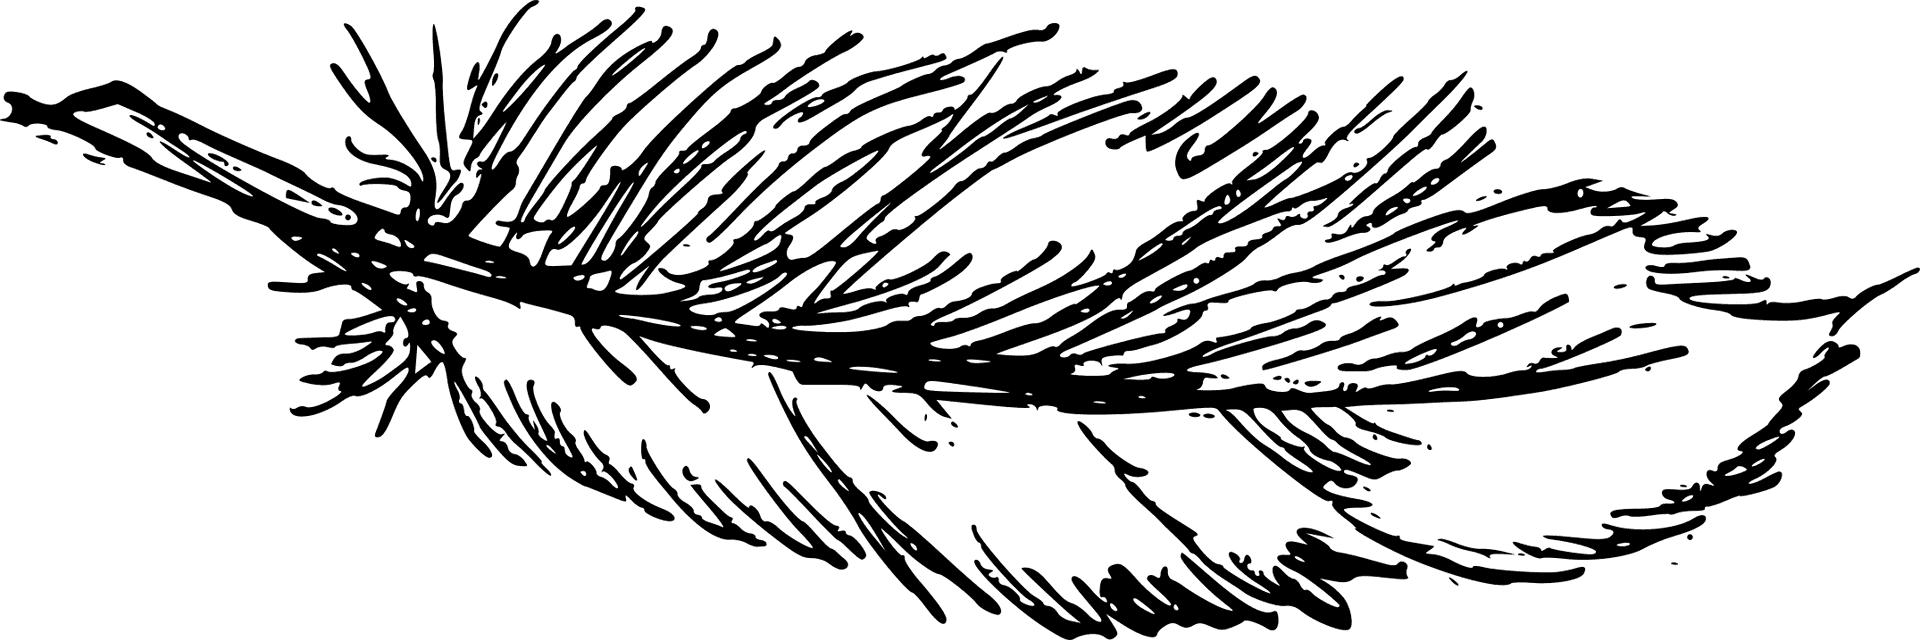 Detailed Feather Sketch Artwork PNG